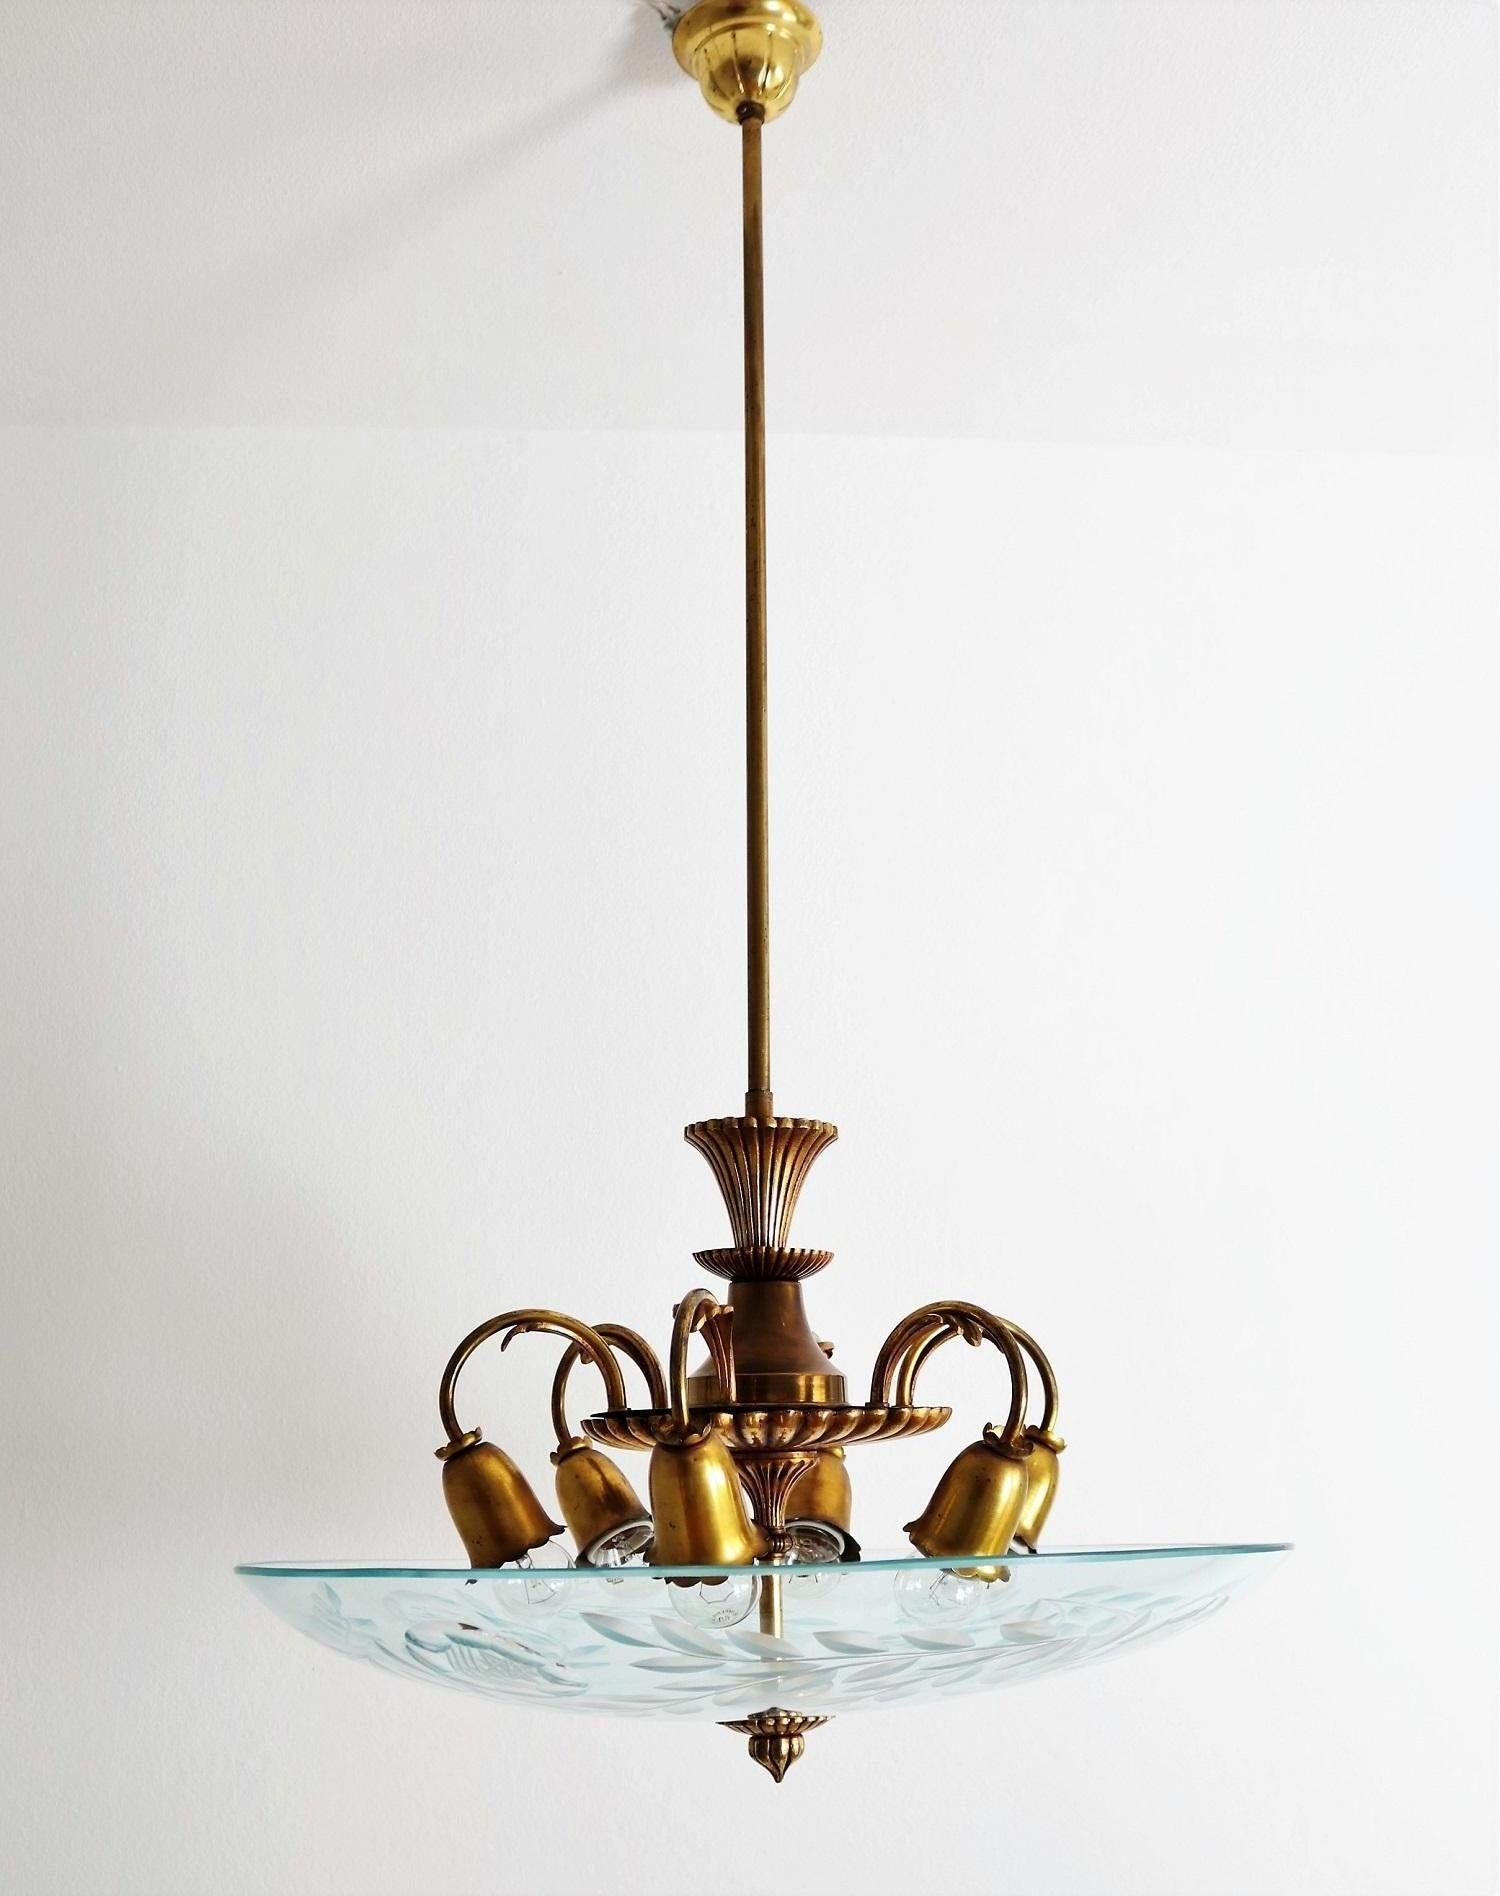 Italian Midcentury Brass and Crystal Glass Chandelier, 1950s For Sale 12